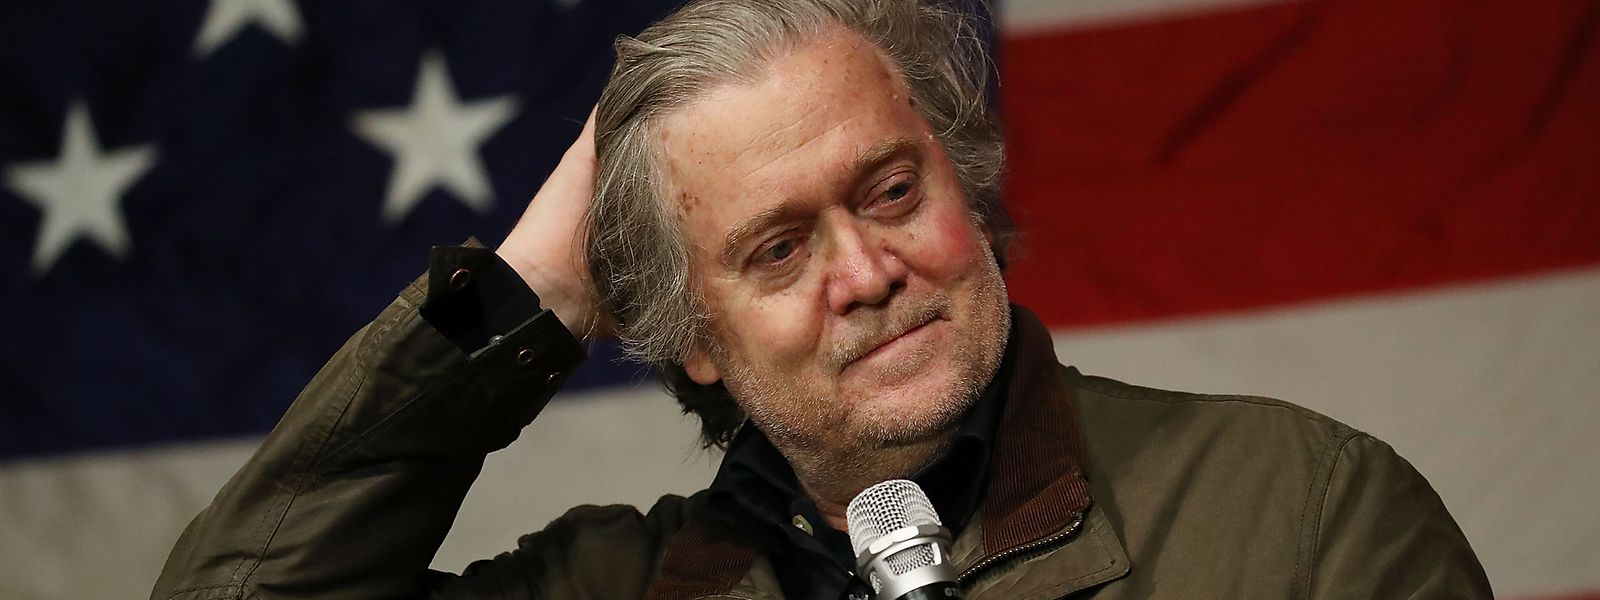 (FILES) This file photo taken on December 5, 2017 shows Steve Bannon speaking before introducing former Republican Senatorial candidate Roy Moore during a campaign event at Oak Hollow Farm in Fairhope, Alabama. 
Former White House chief strategist Steve Bannon has described a meeting between President Donald Trump's son Don Jr and a Russian lawyer during the 2016 presidential election campaign as "treasonous" and "unpatriotic," The Guardian reported on January 3, 2018 .Bannon made the scathing comments in Michael Wolff's book "Fire and Fury: Inside the Trump White House," which is to be published next week. "They're going to crack Don Junior like an egg on national TV," Bannon reportedly said.
 / AFP PHOTO / GETTY IMAGES NORTH AMERICA / JOE RAEDLE